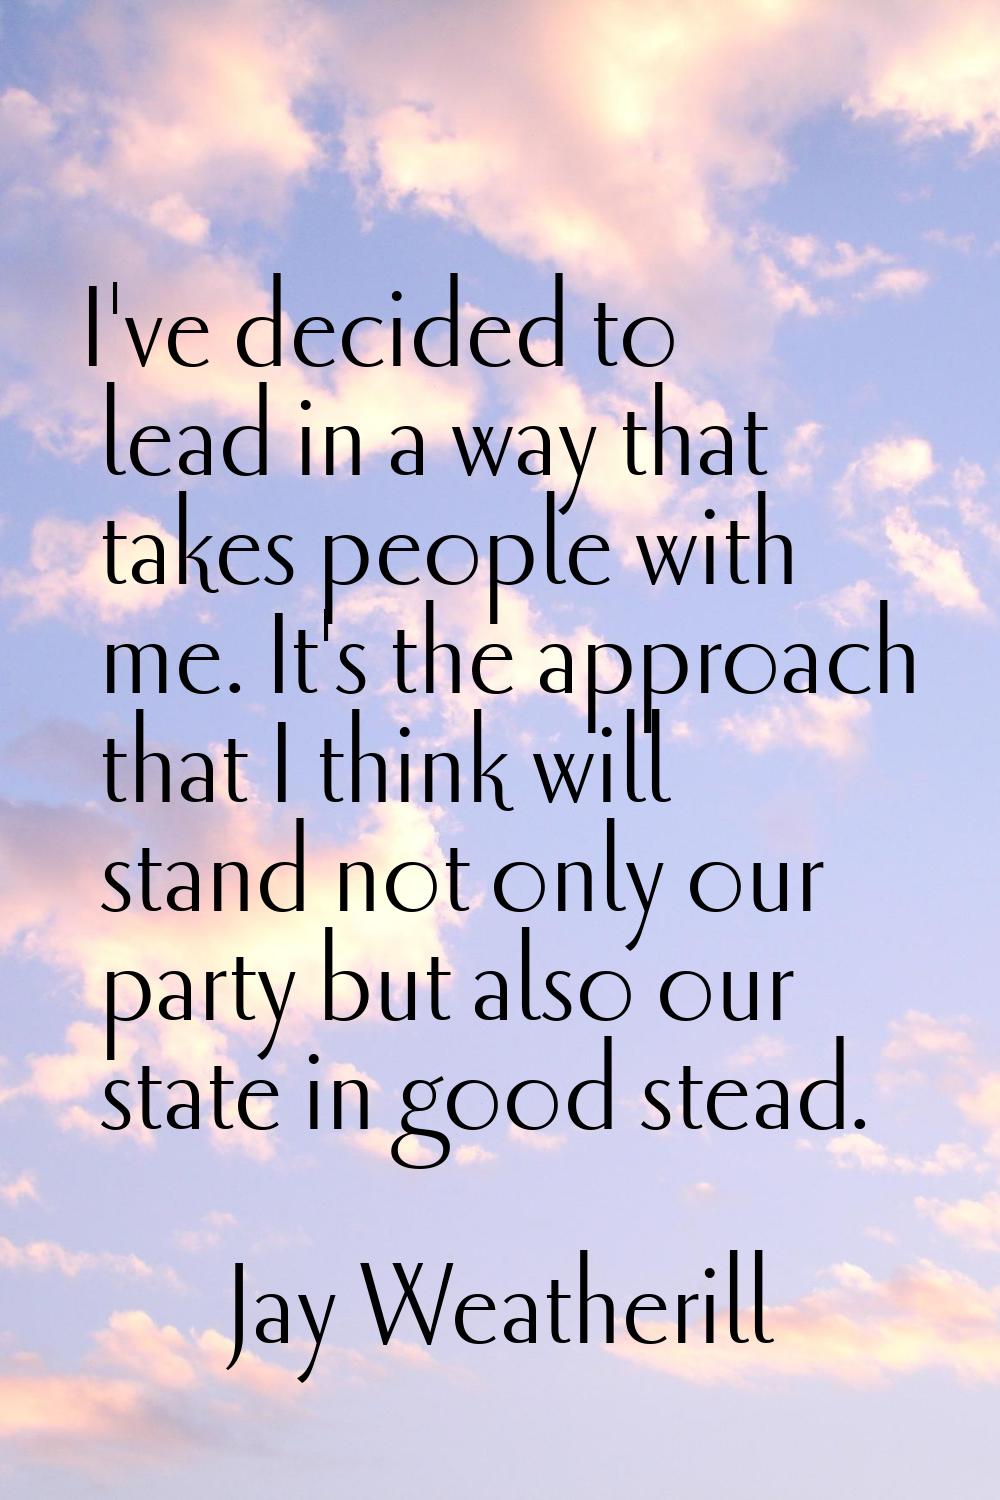 I've decided to lead in a way that takes people with me. It's the approach that I think will stand 